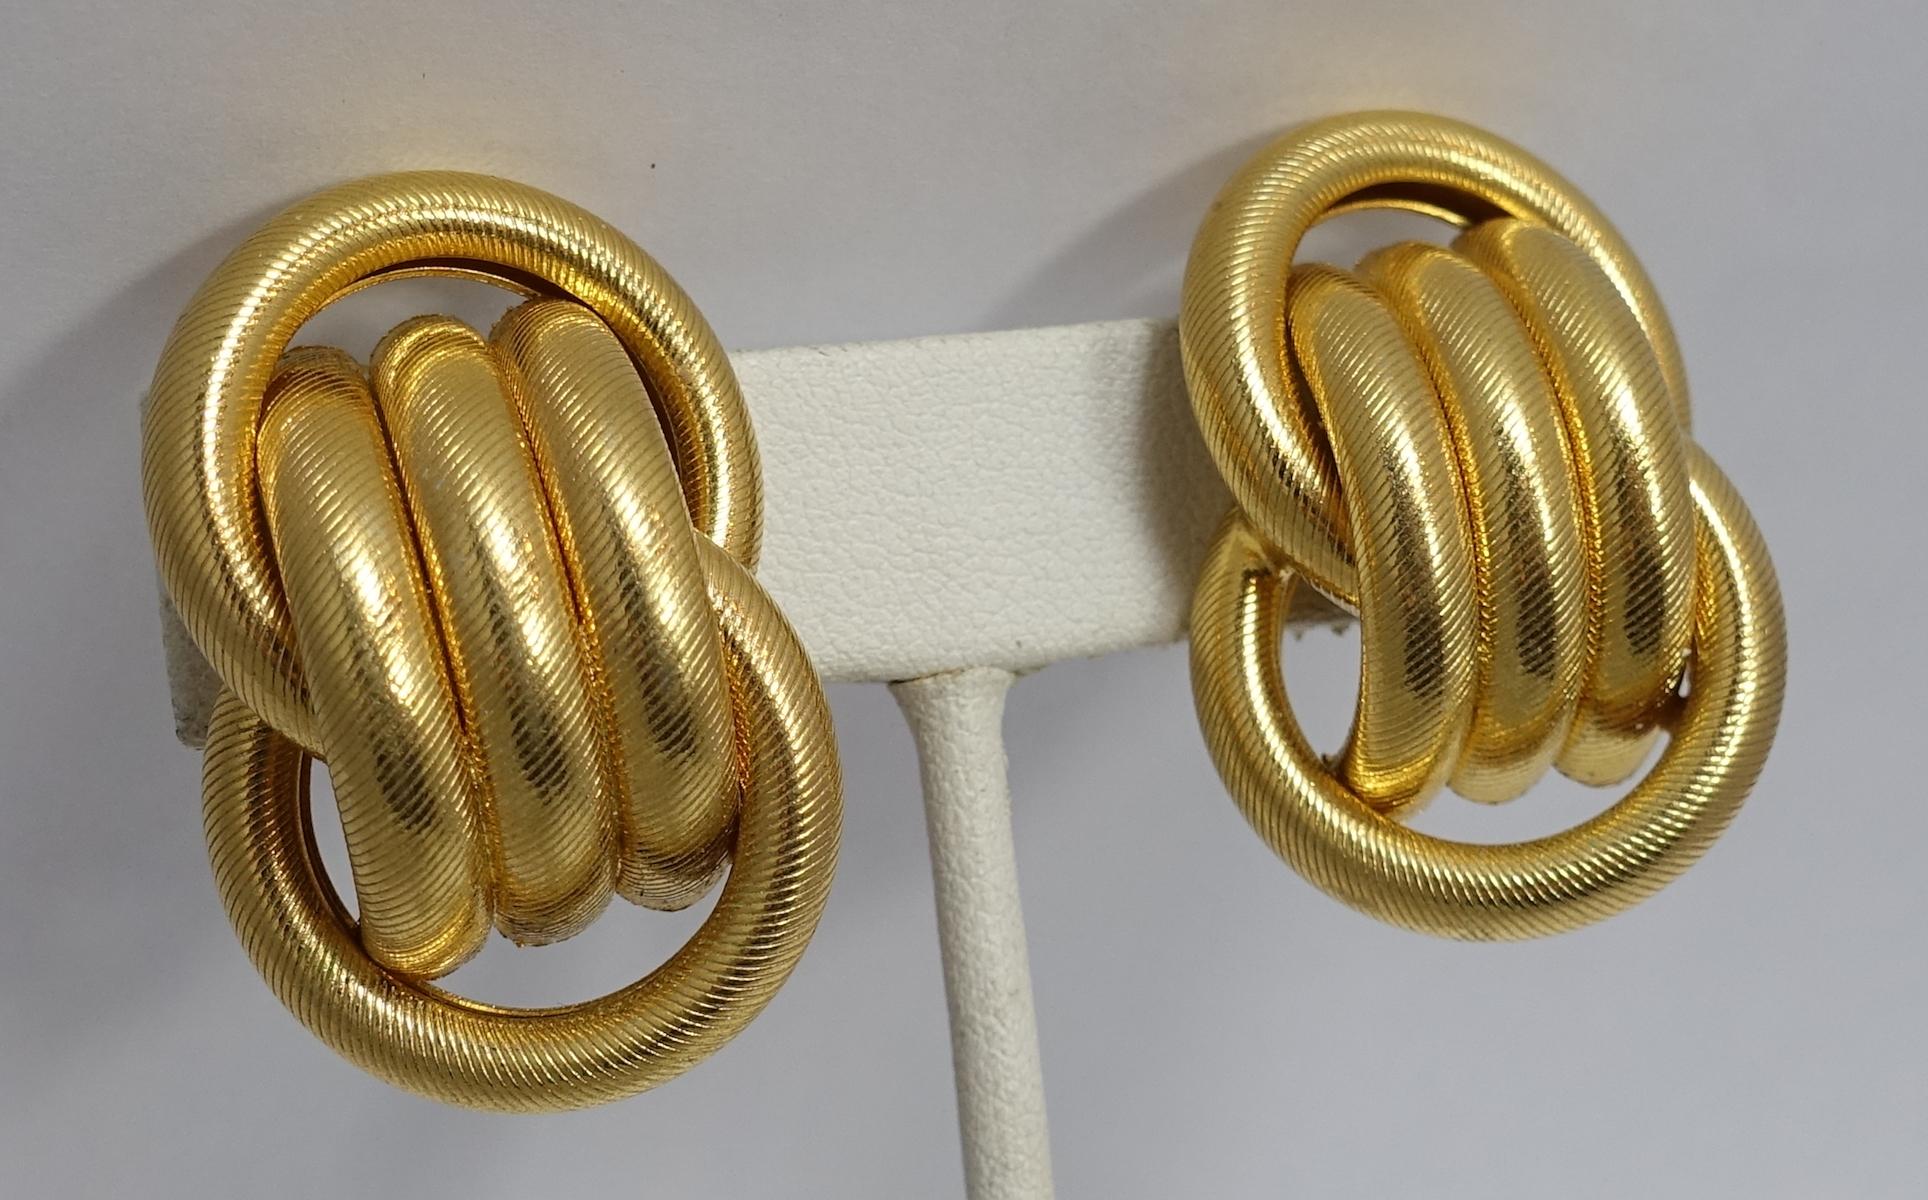 These vintage signed earrings feature a swirling design in a gold tone setting.  These clip earrings measure 1-3/8” x 1” and are signed “Napier”.  They are in excellent condition.